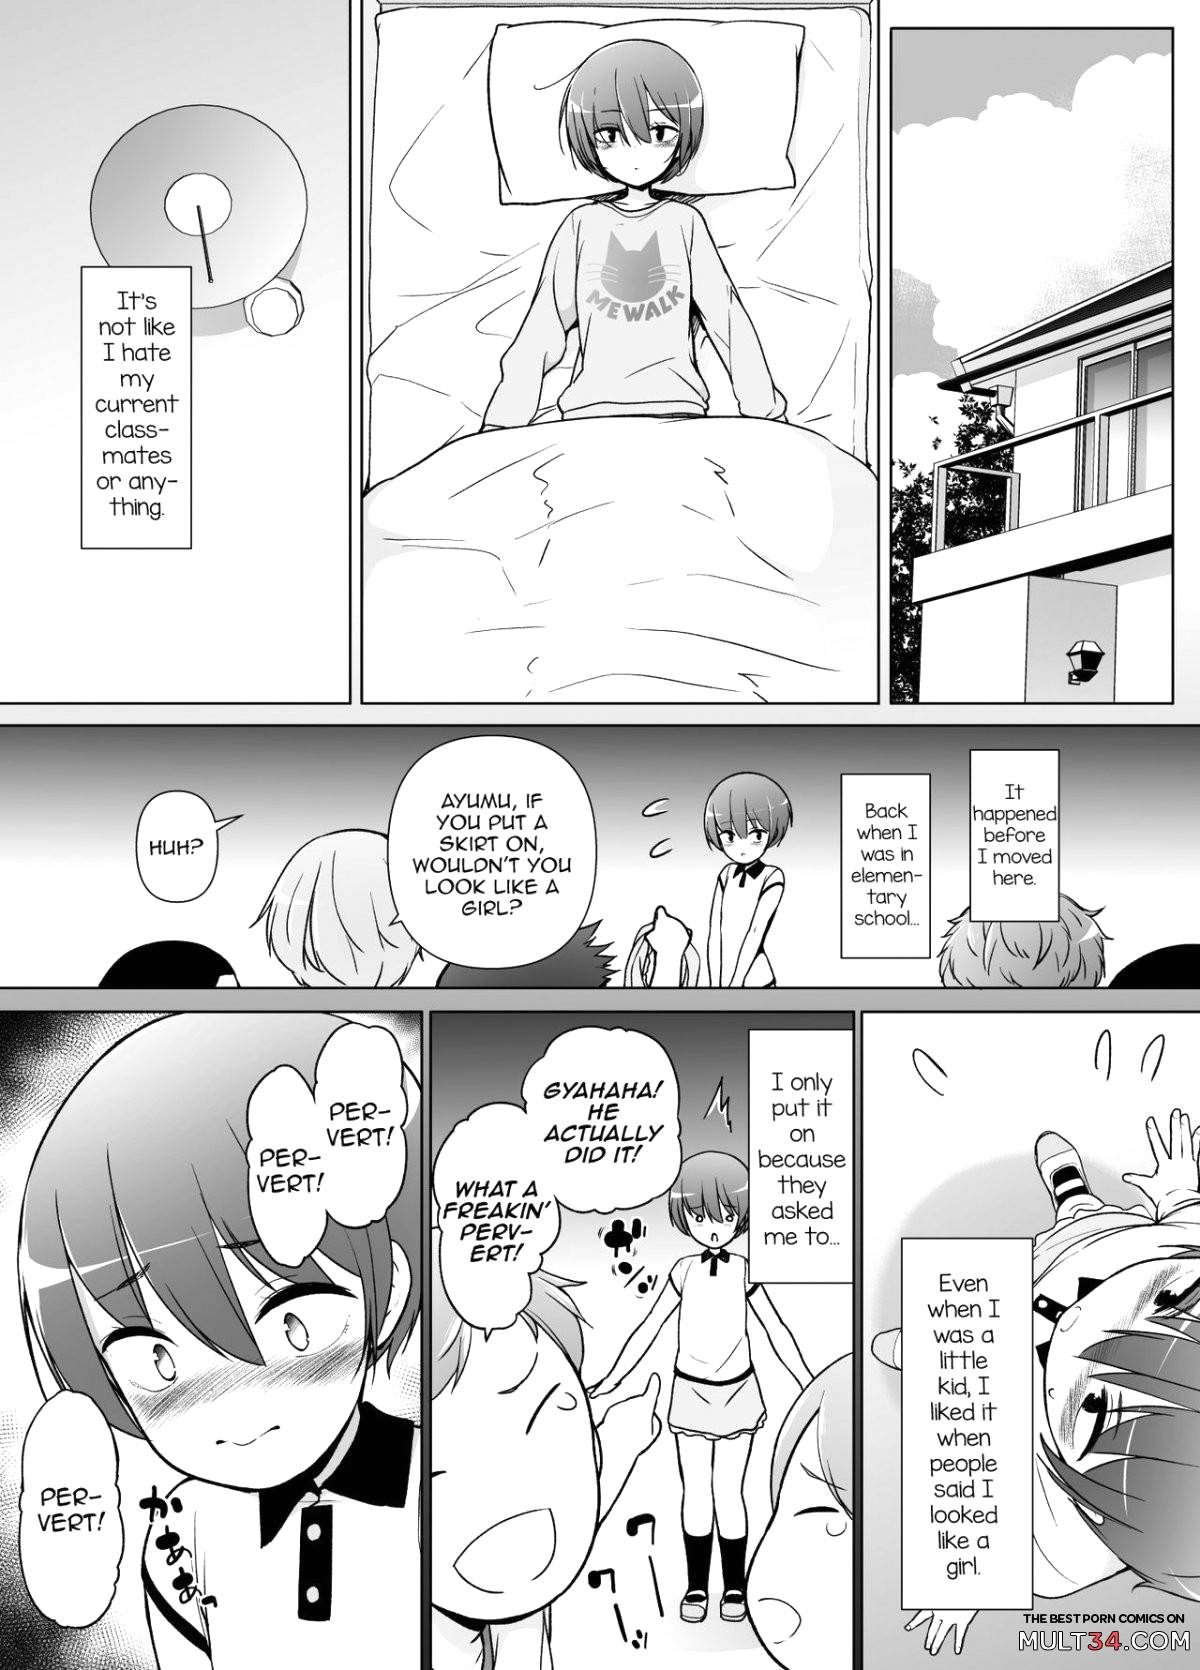 The Pervert page 4